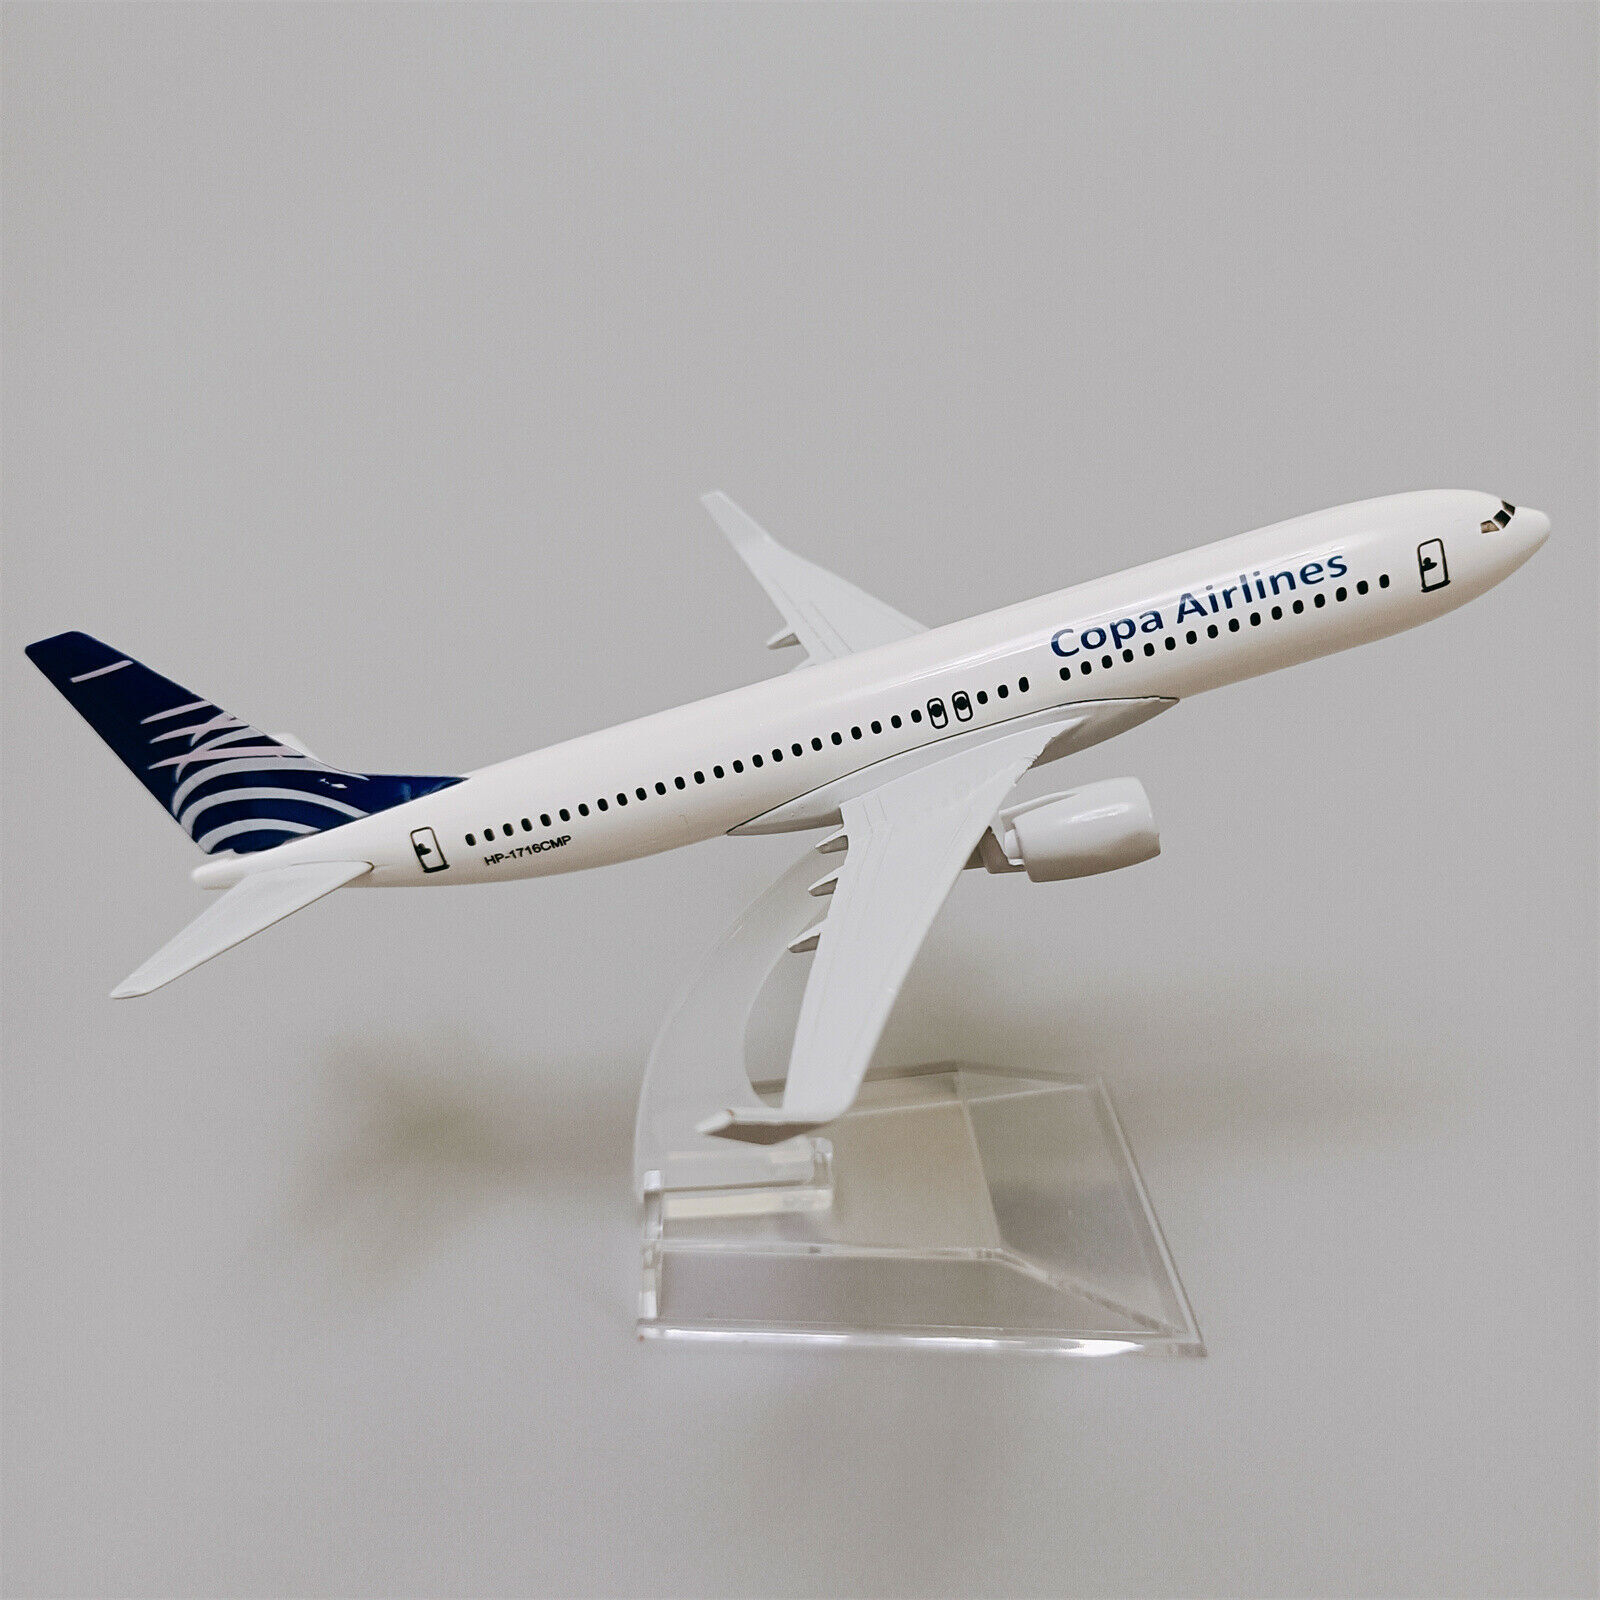 16cm Air Copa Airlines Boeing B737 Diecast Airplane Model Plane Aircraft Alloy G